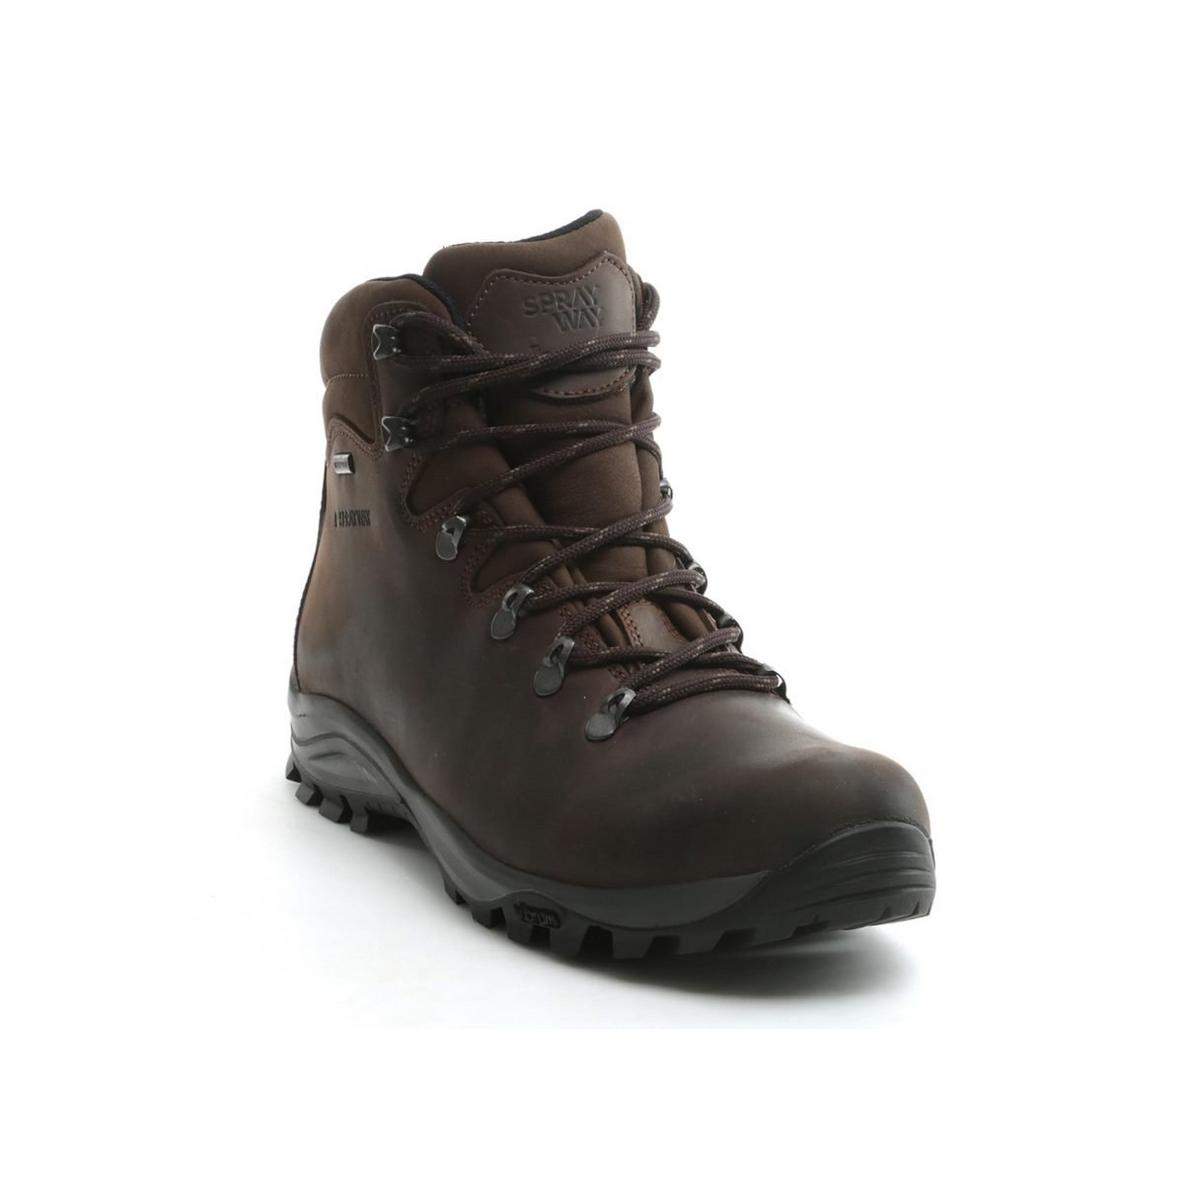 Sprayway Men's Canna Hiking Boots - Brown